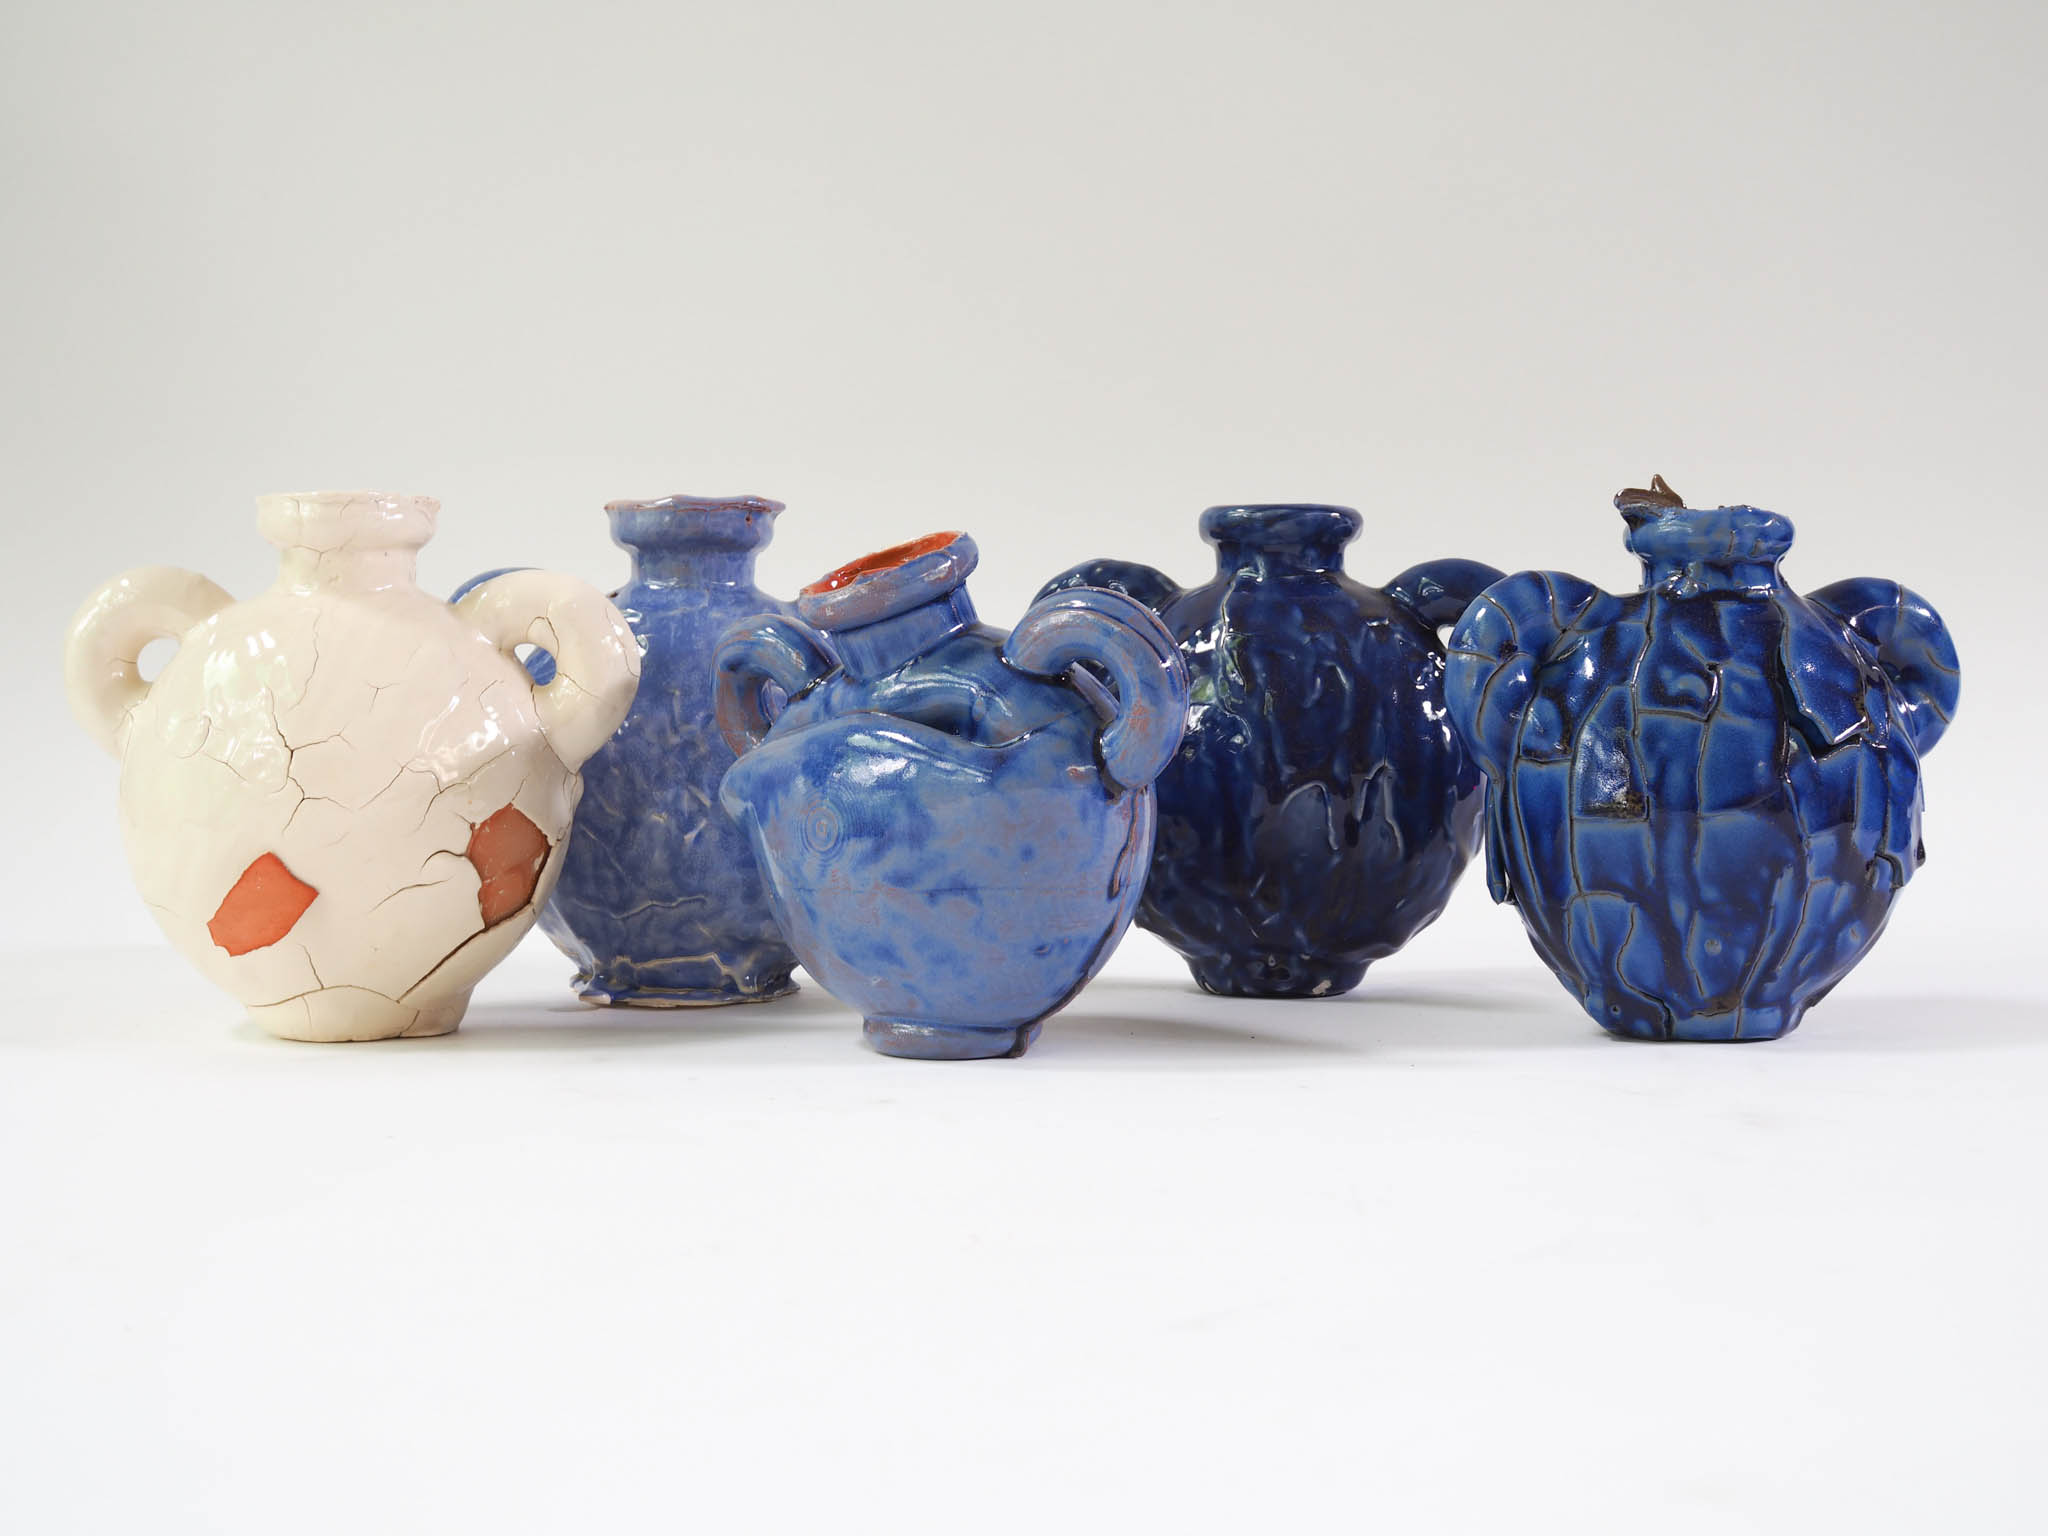 collection of ceramic vases in different shades of blue and with different sizes of cracks